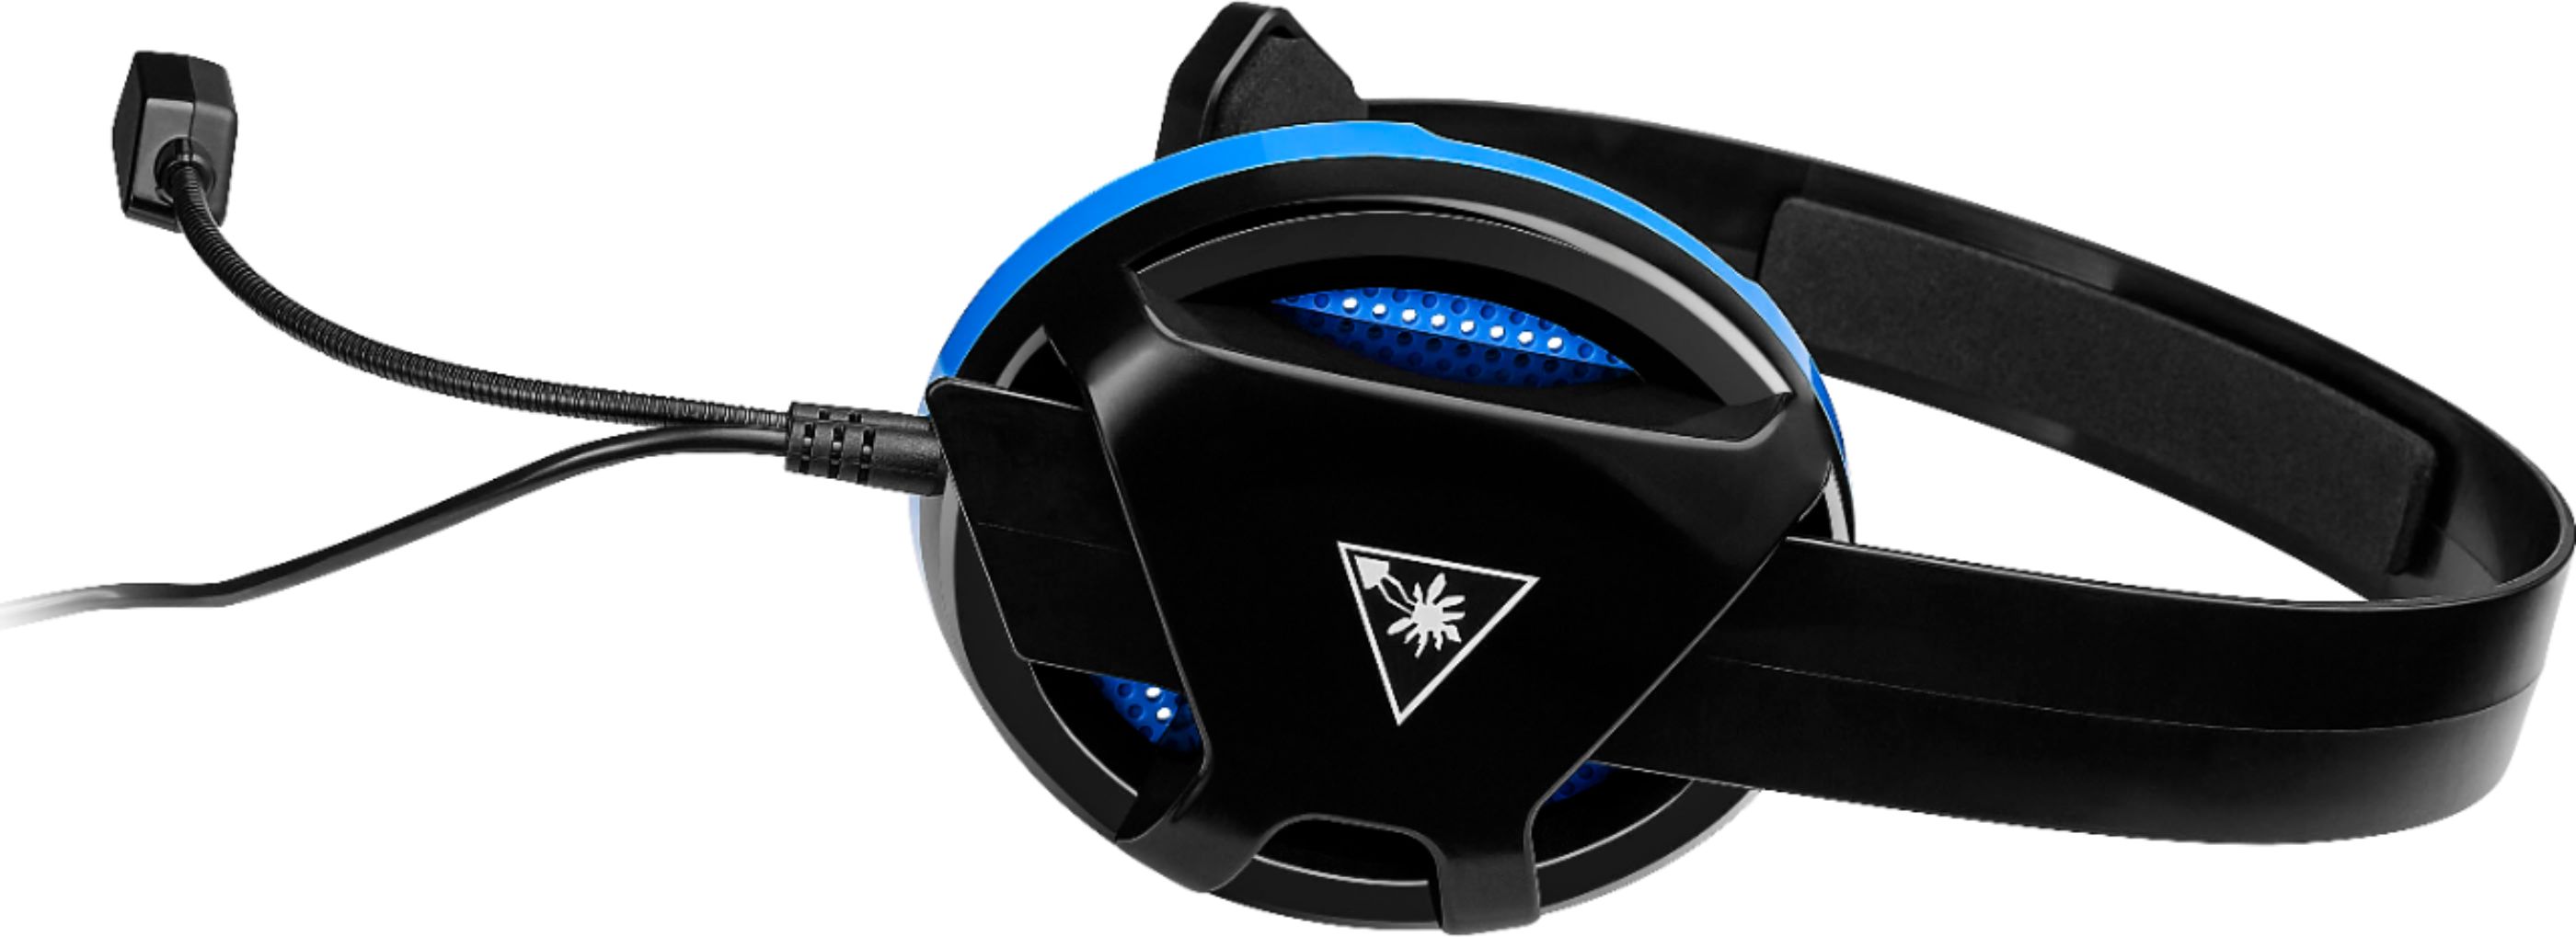 Turtle PS4 Beach Recon PS5 Chat Buy: Black/Blue and Best TBS-3345-01 for Headset